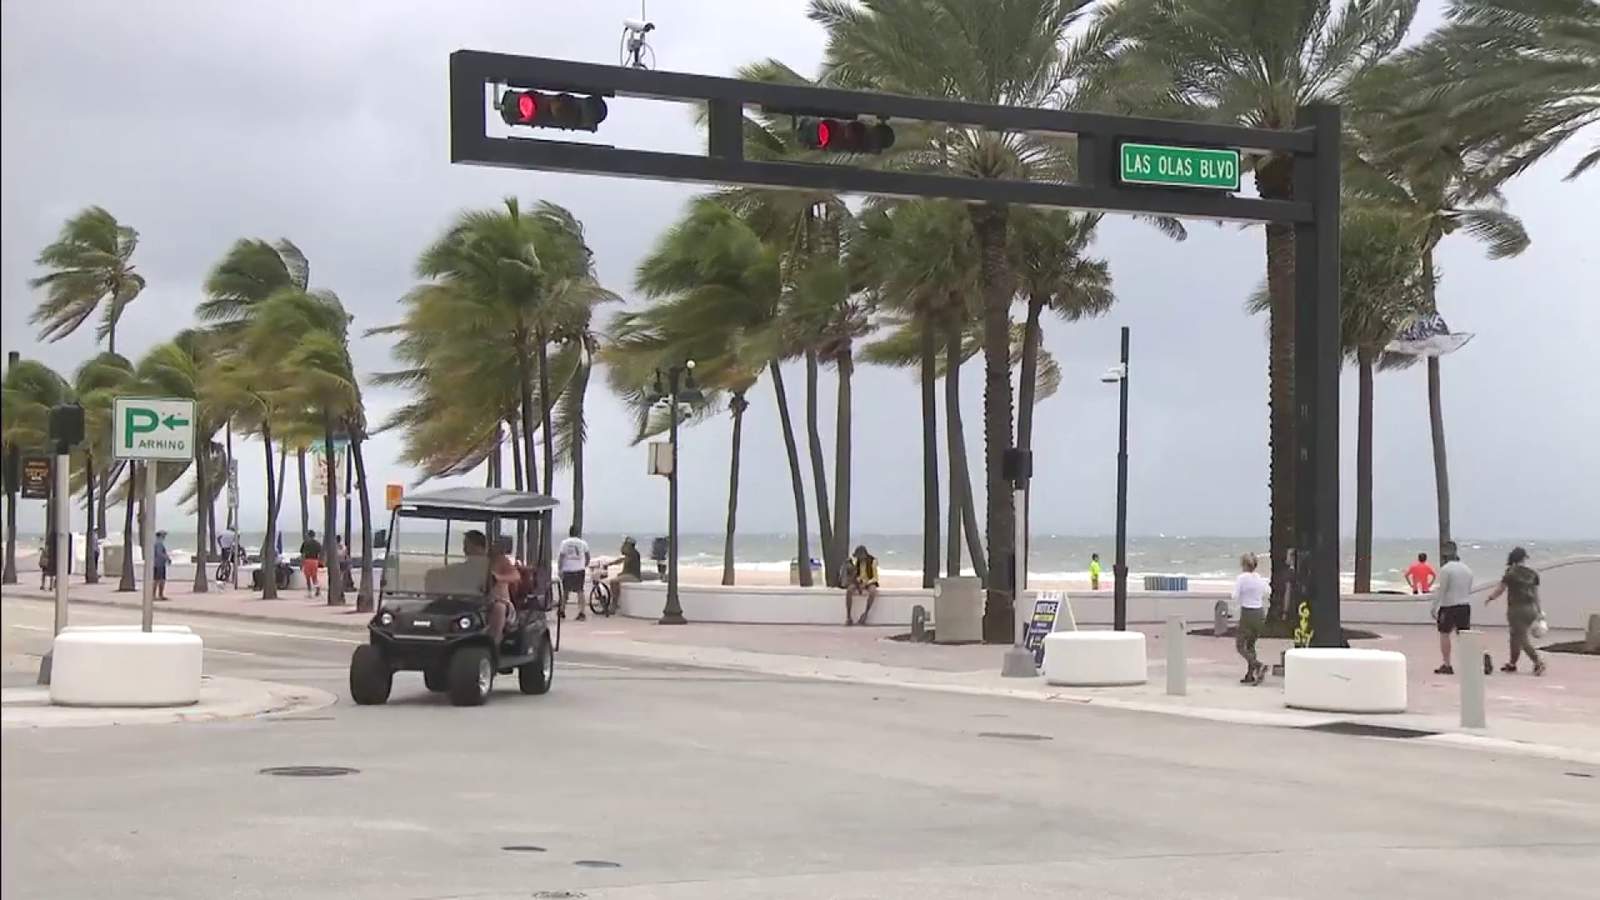 Man dies from being stabbed with ‘sharp object’ near Fort Lauderdale Beach